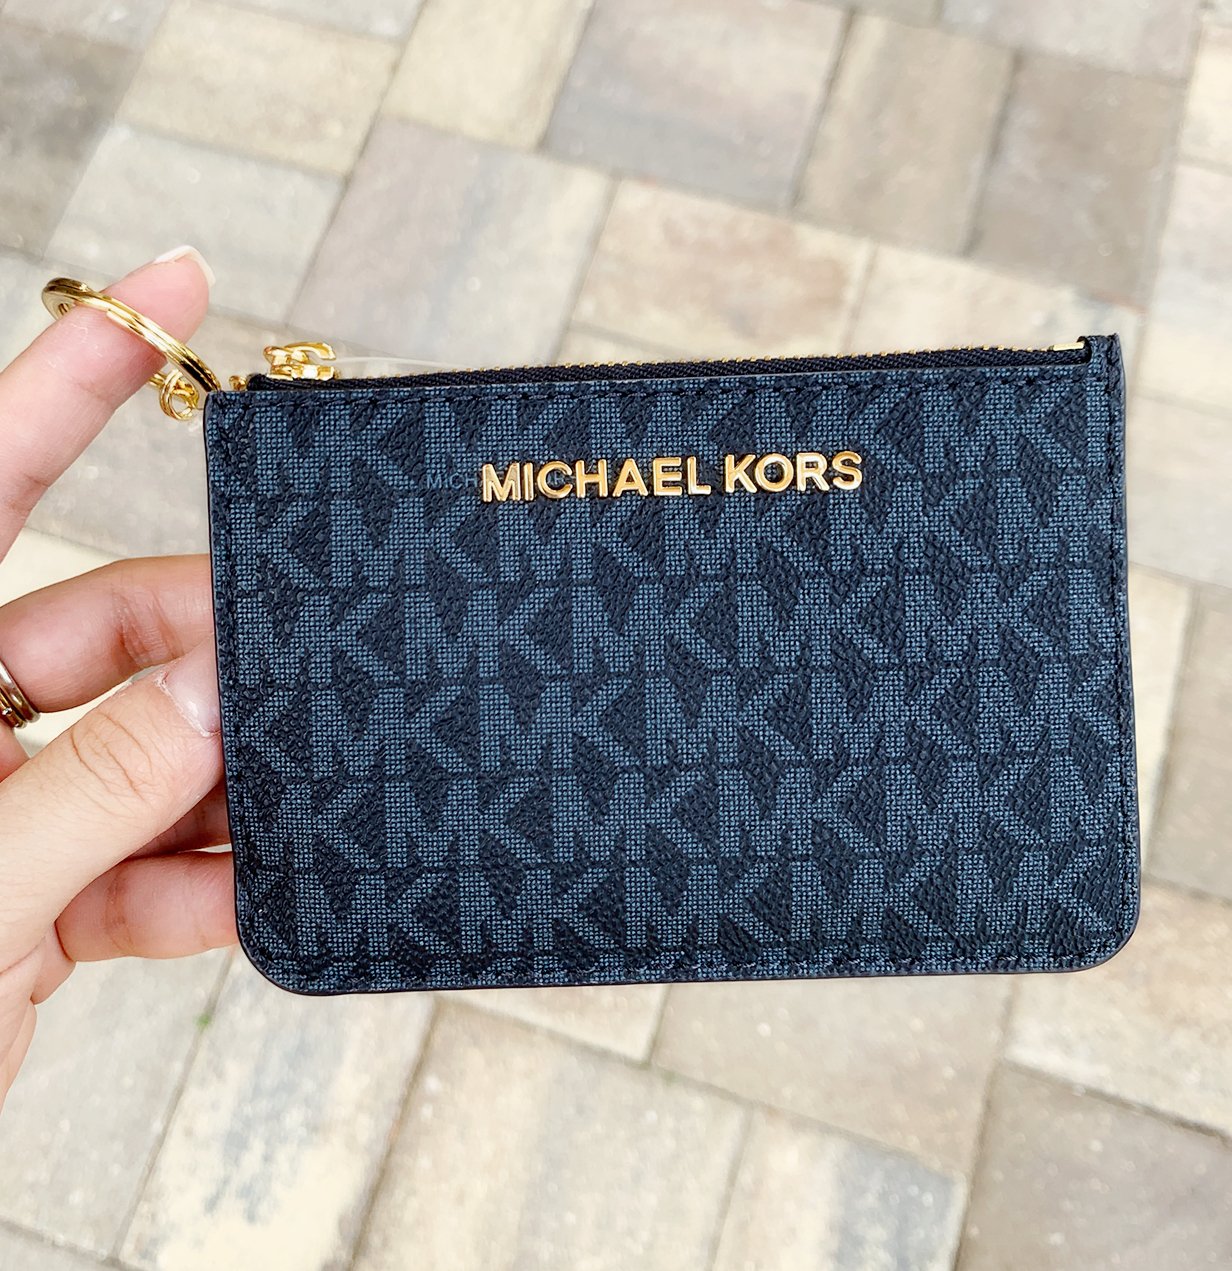 Navy Blue Coin Purse Michael Kors - NY Outlet Brands in Dubai